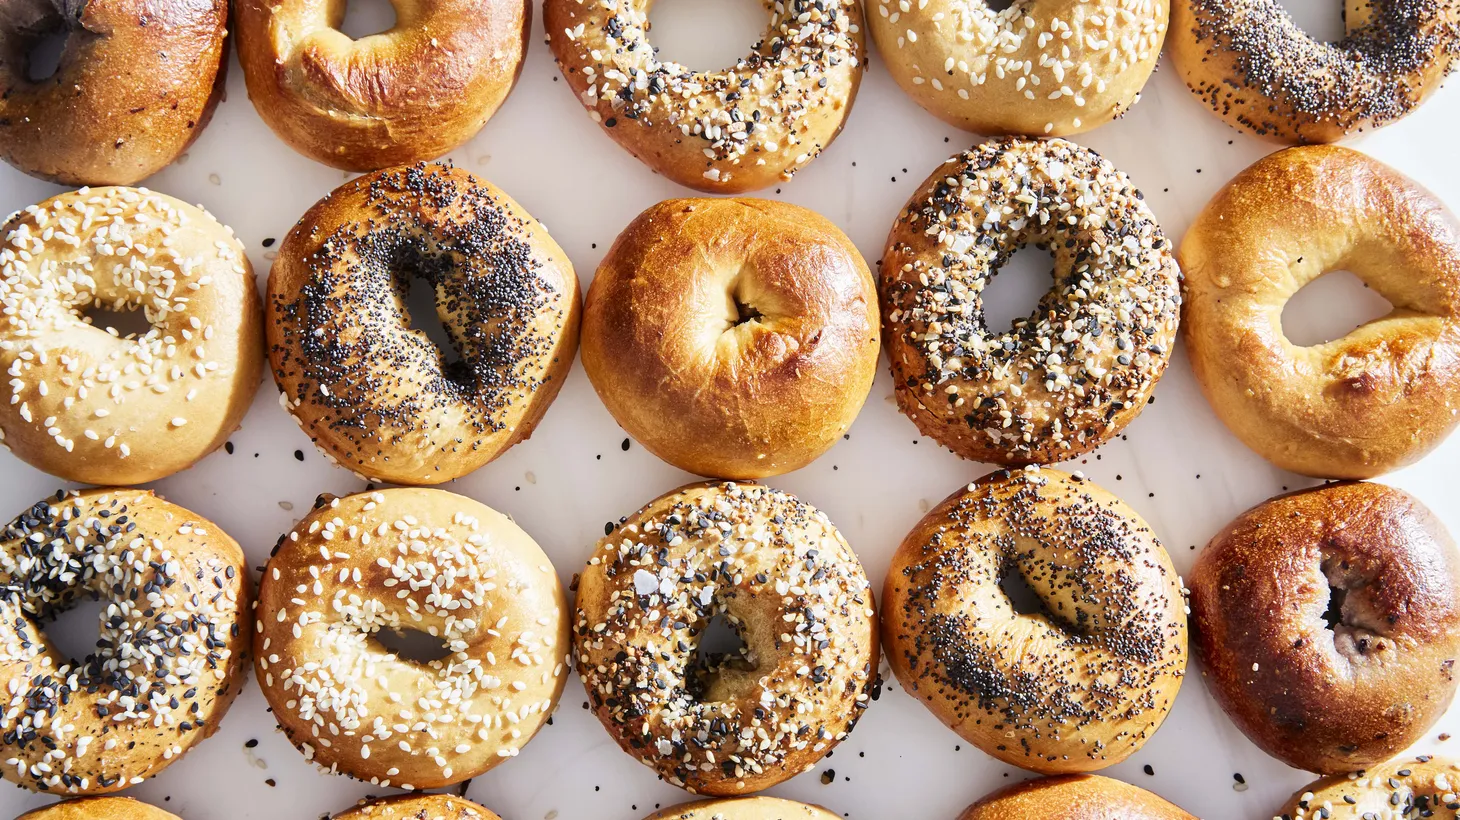 Cathy Barrow taught herself to make bagels at home and attests that a high-gluten flour is the key to her success.